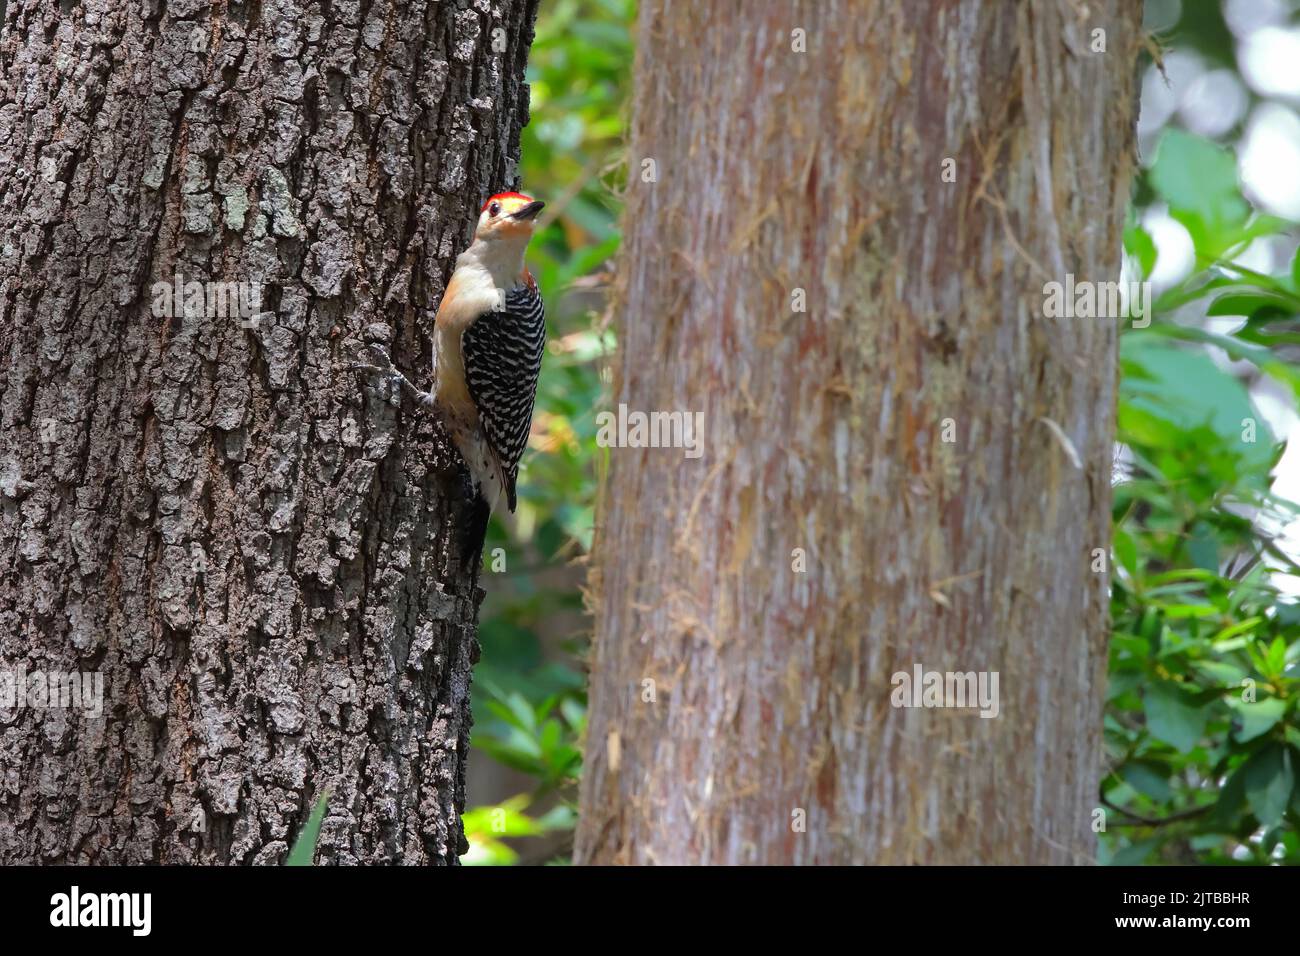 A red-bellied woodpecker clinging to a large tree trunk Stock Photo